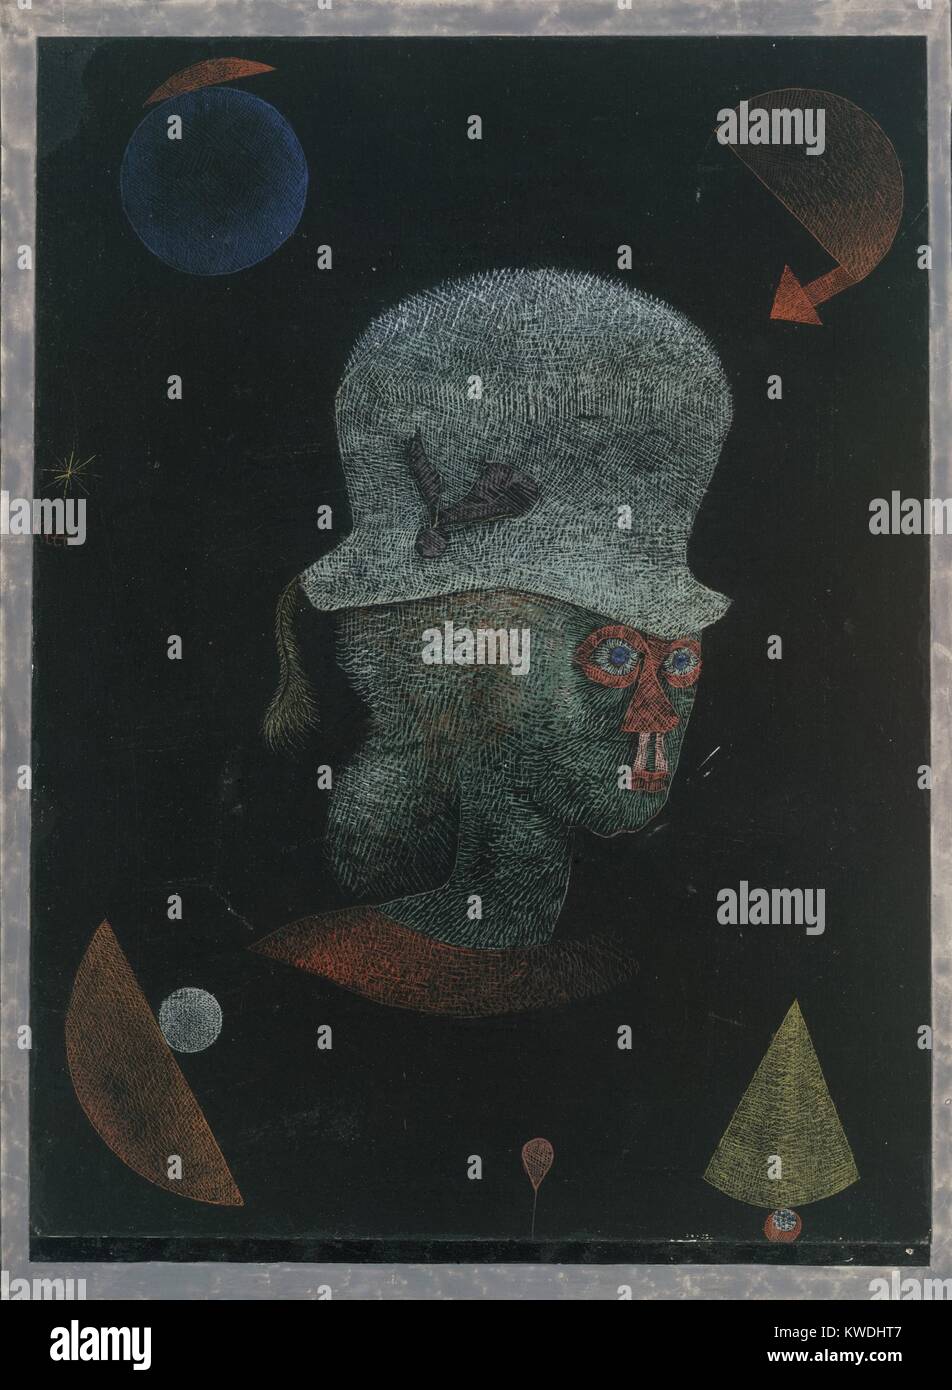 ASTROLOGICAL FANTASY PORTRAIT, by Paul Klee, 1924, Swiss drawing, gouache, and ink on paper. Imaginary humanoid drawn with white and colored hatching on black paper. In the corners are hatched renderings of composite geometric forms (BSLOC 2017 7 24) Stock Photo